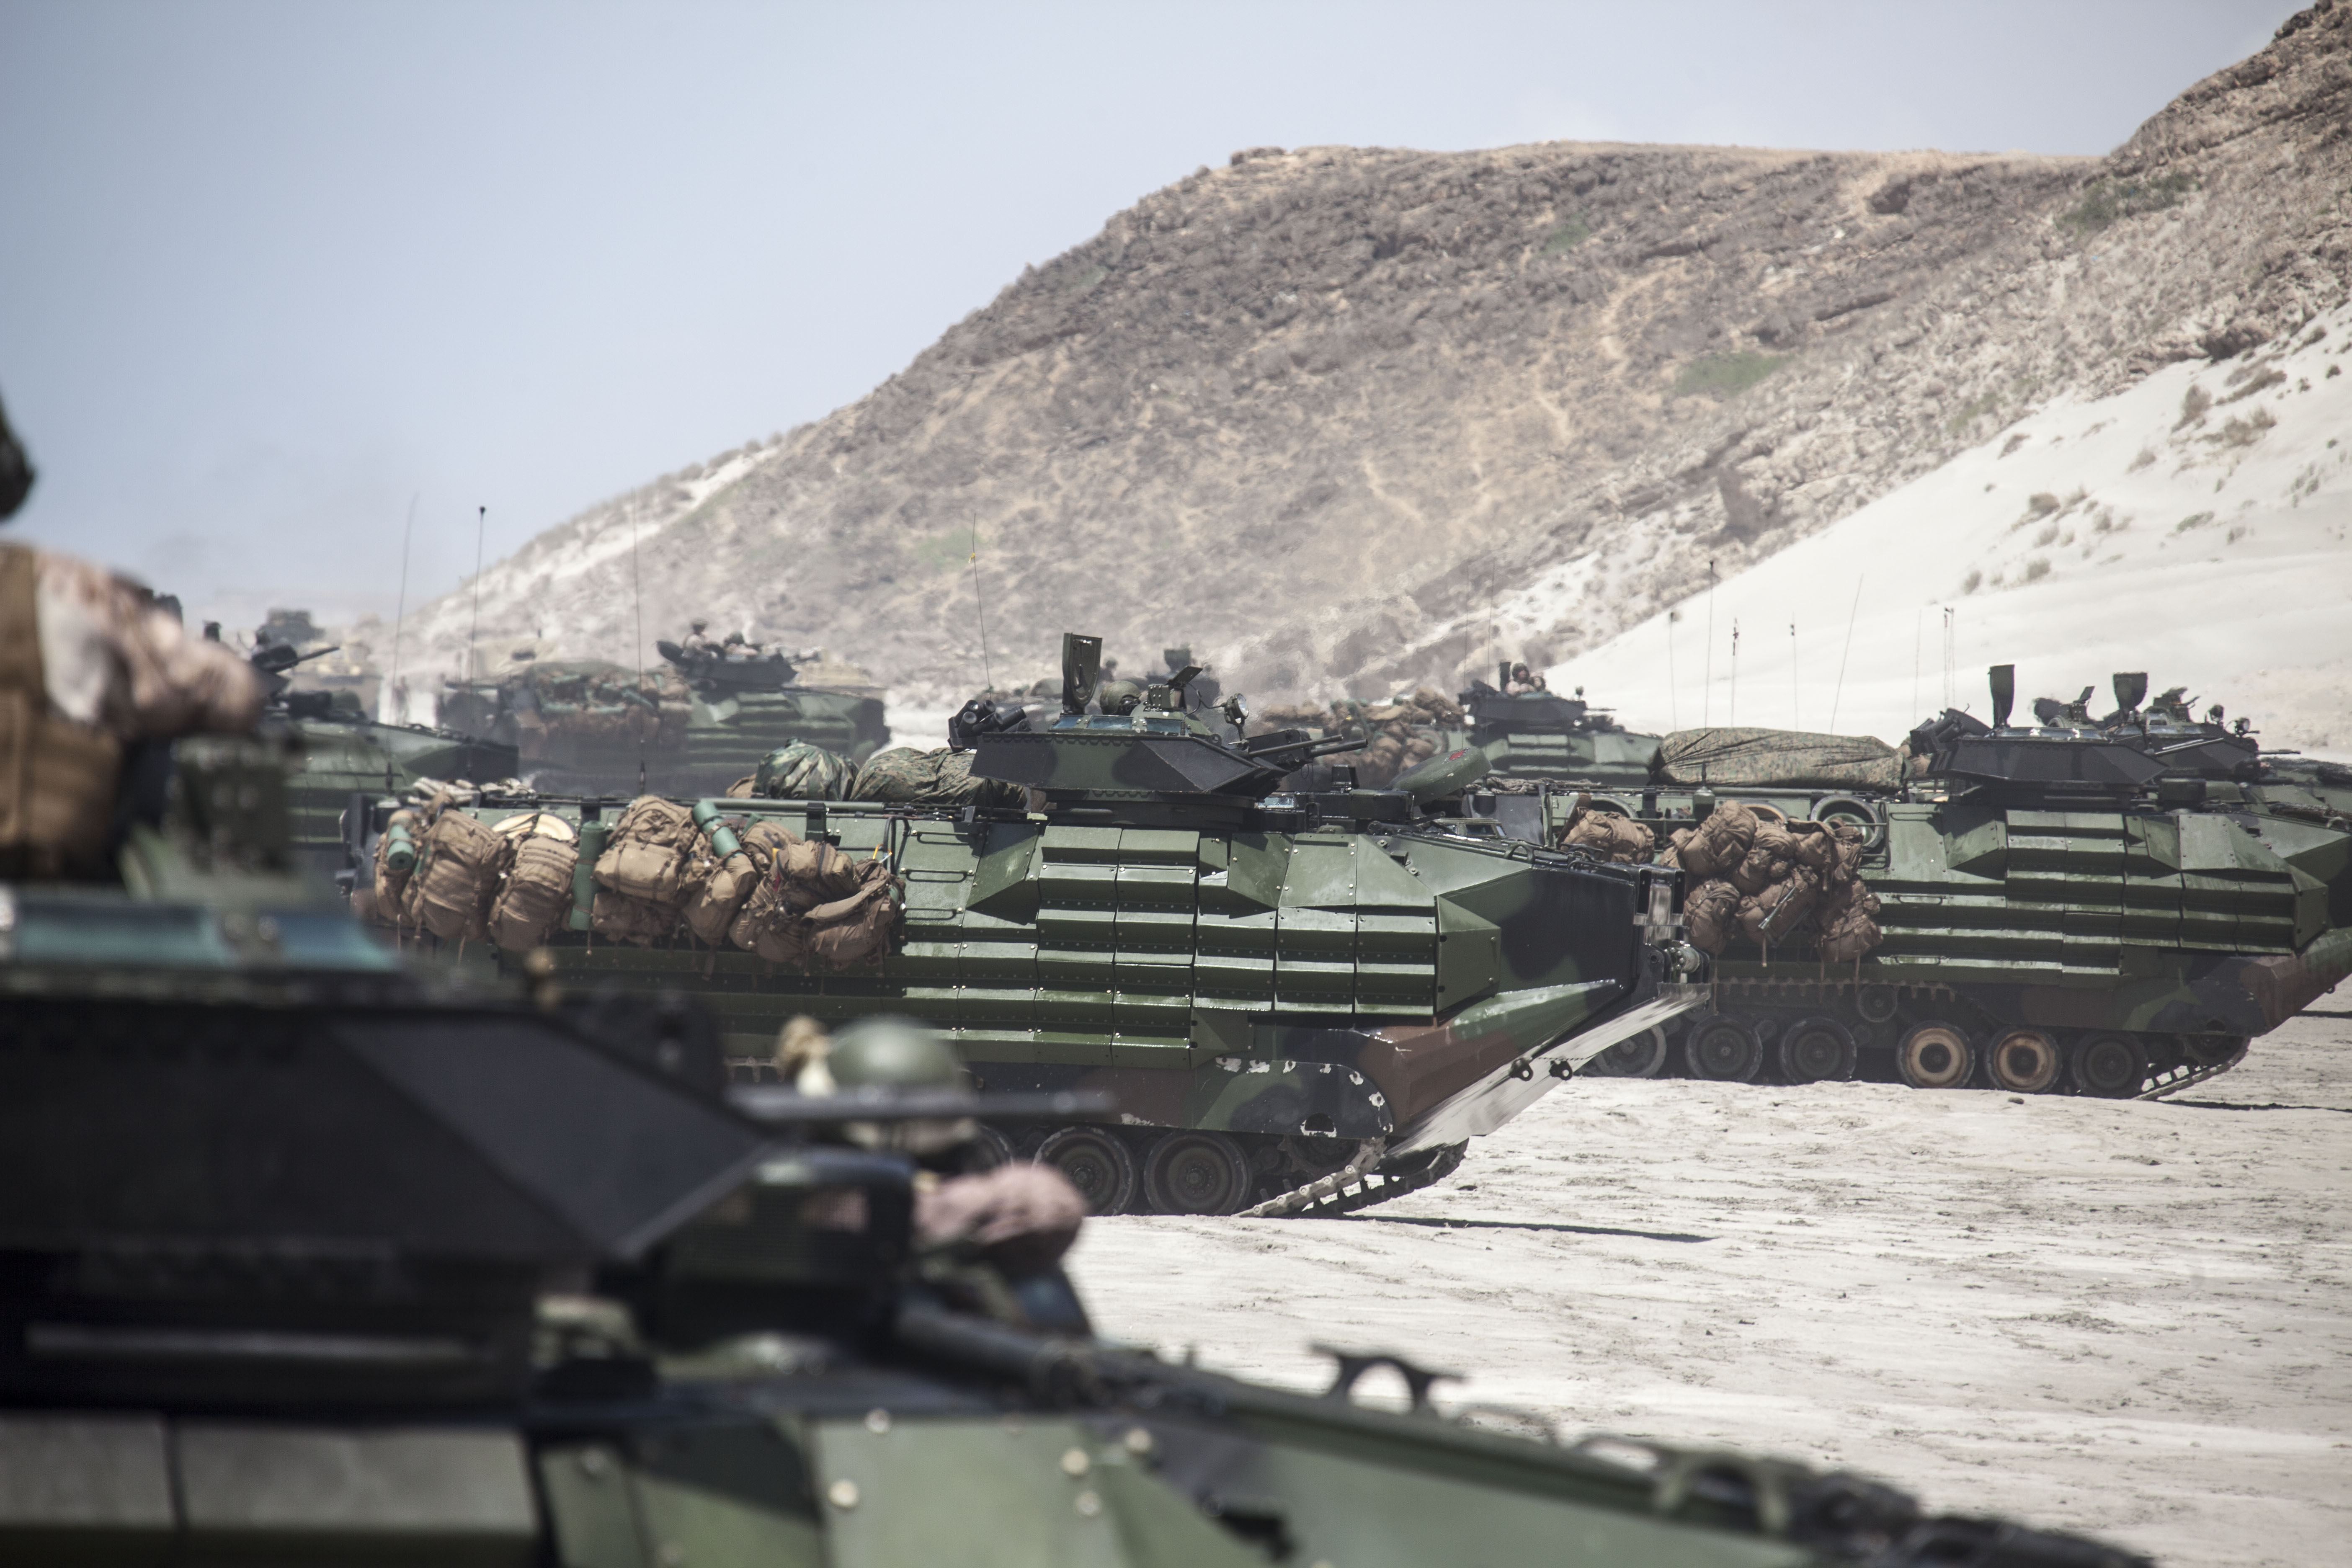 US Marines from 26th Marine Expeditionary Unit (MEU) drive their AAVs on April 20, 2013. US Marine Corps Photo.